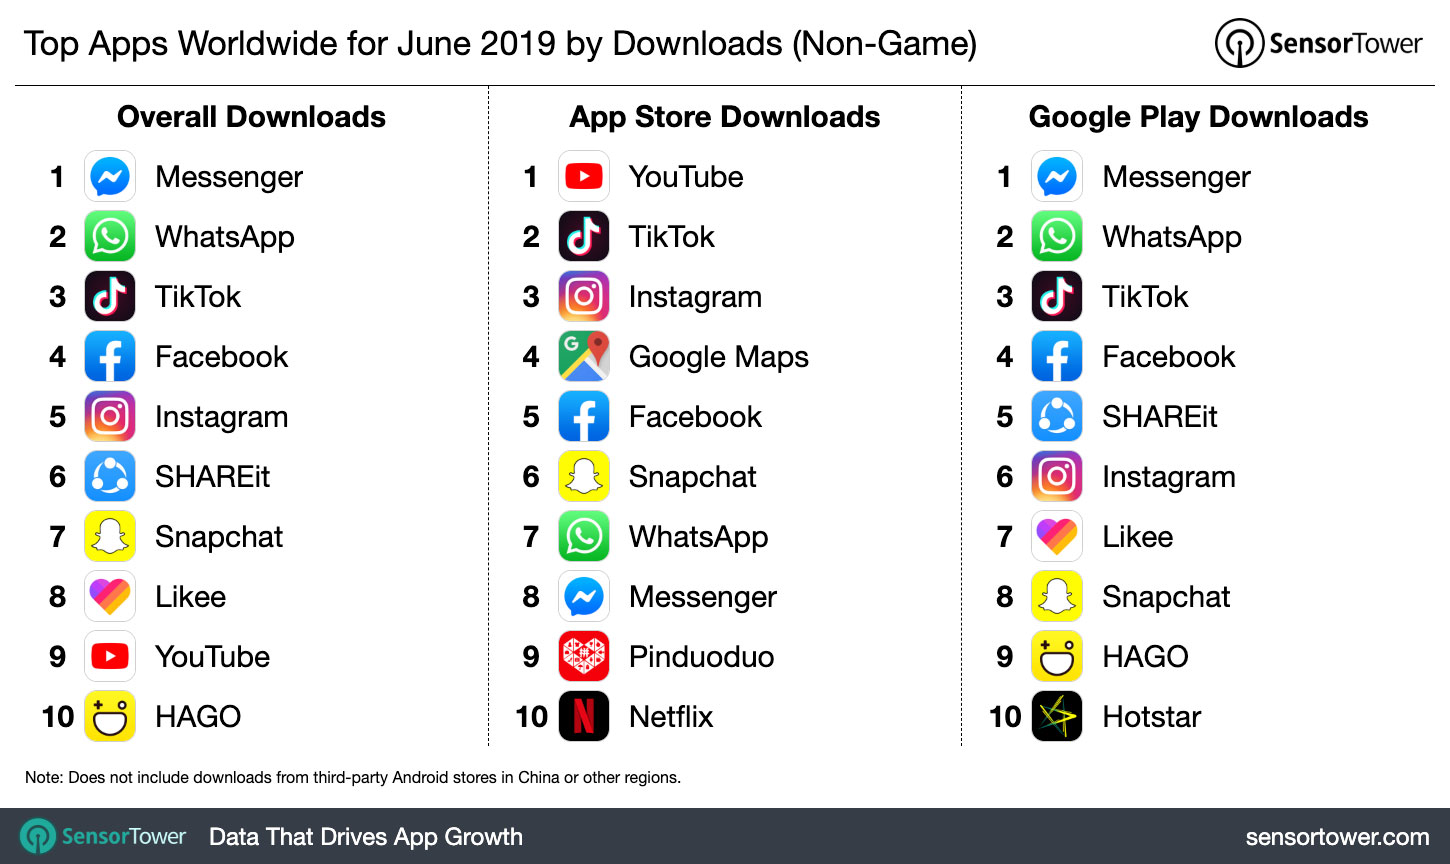 Top Apps Worldwide for June 2019 by Downloads